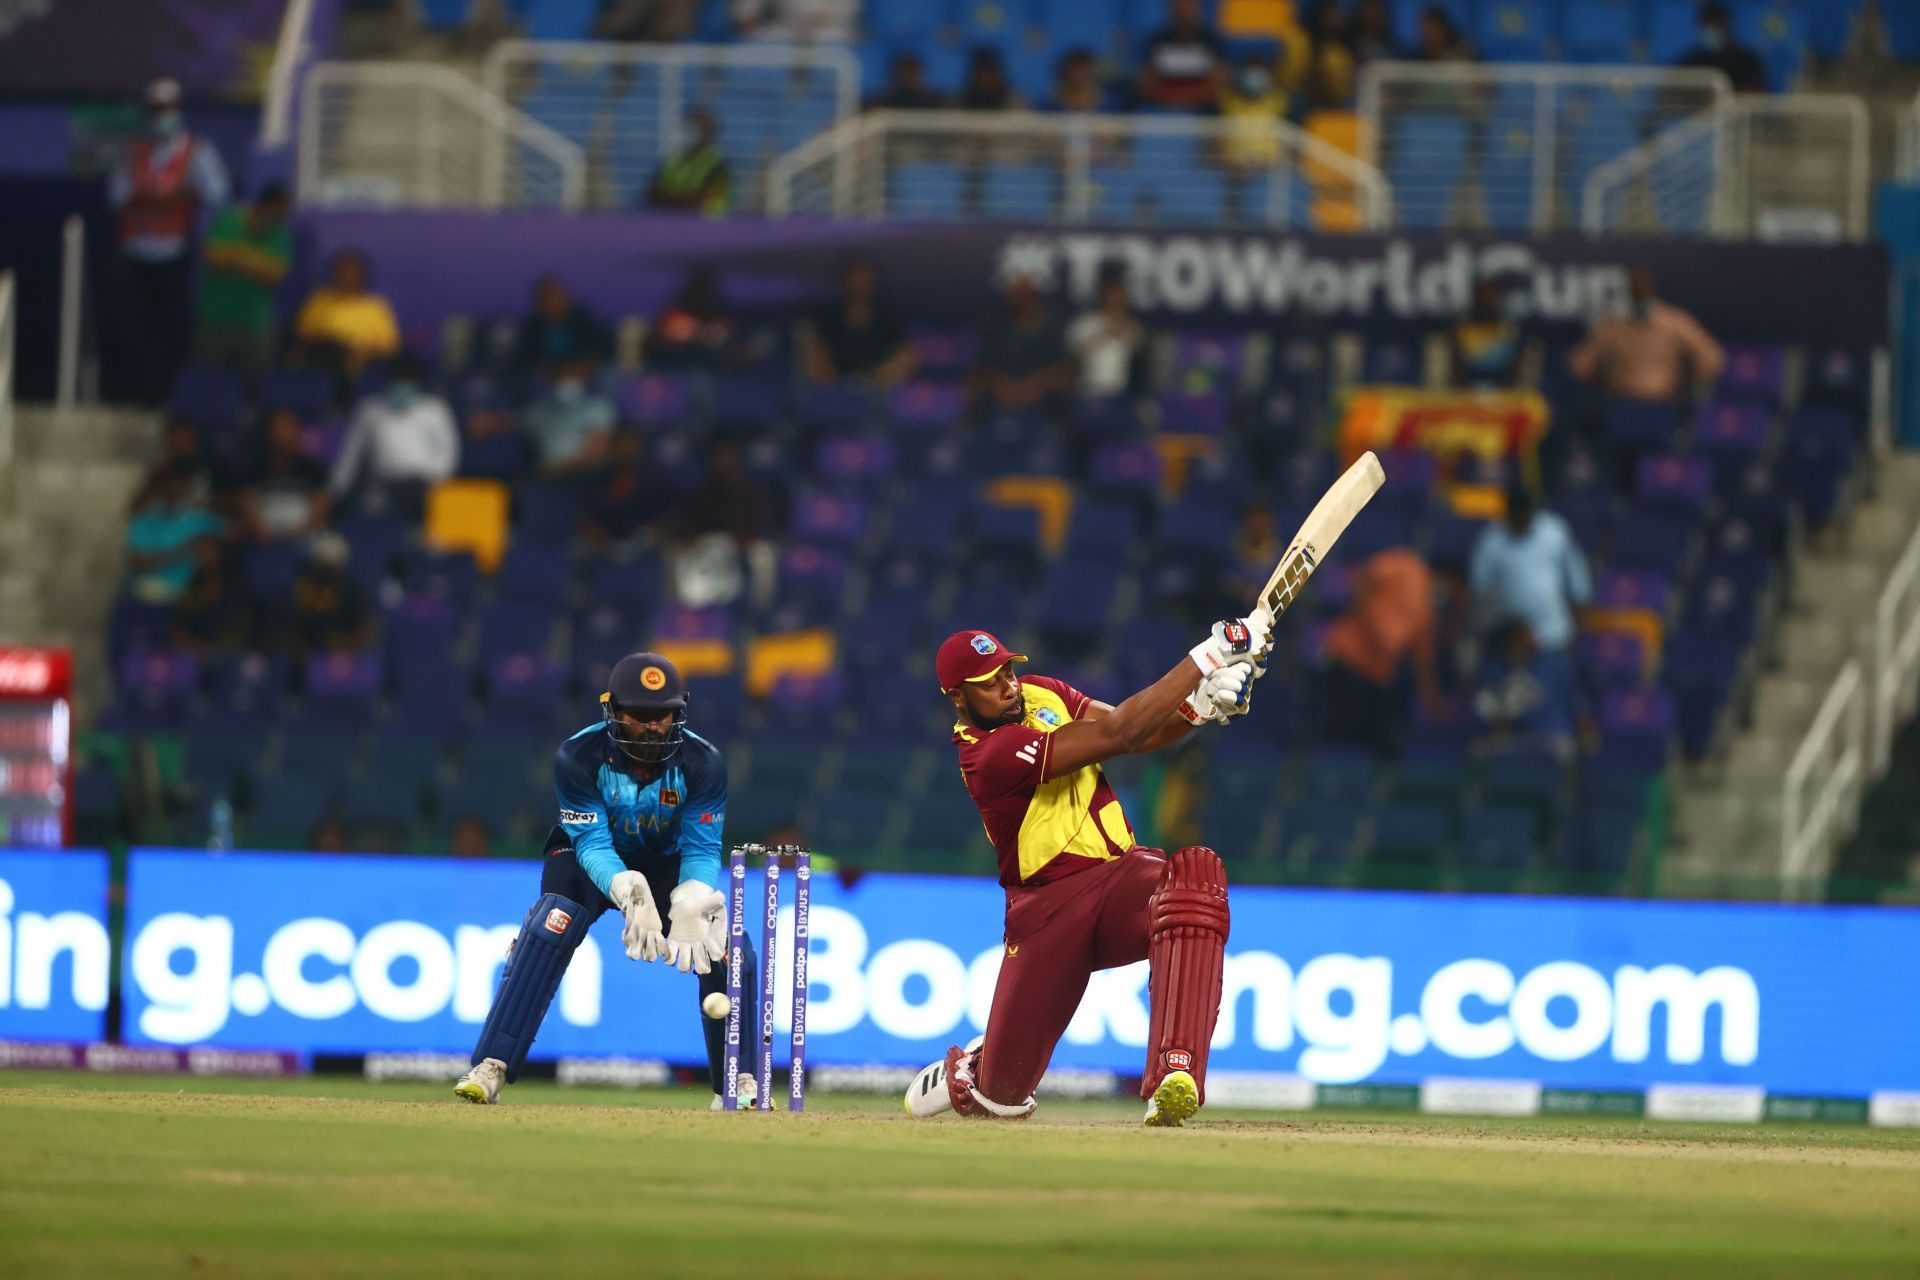 Kieron Pollard could be the key for the Windies in the middle order.